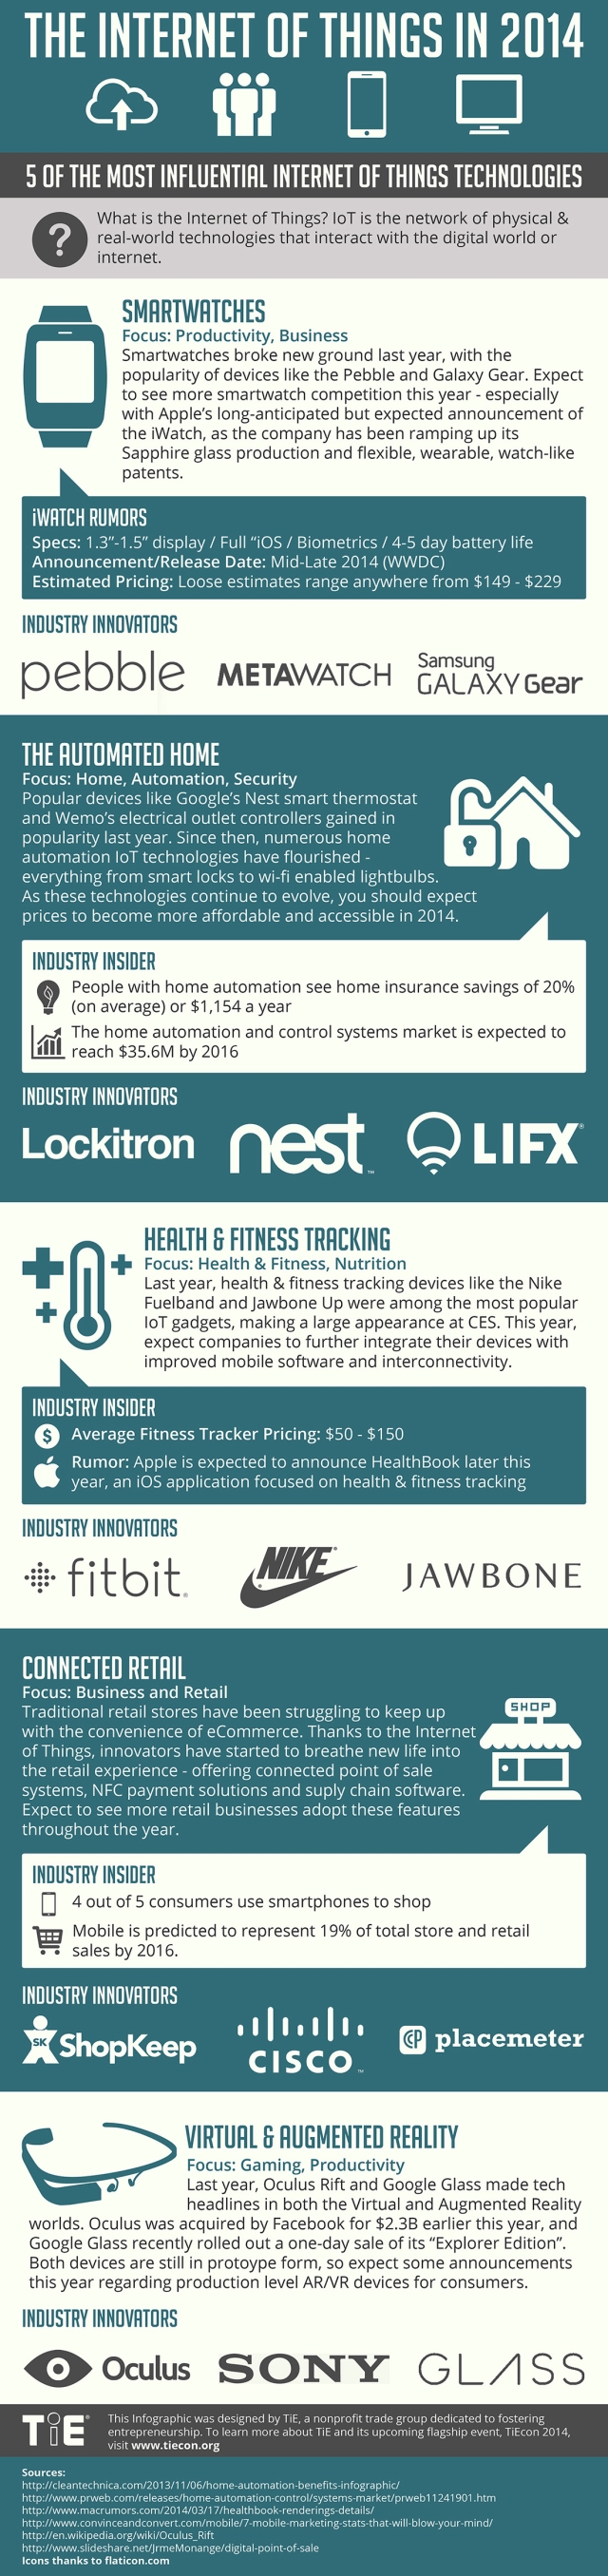 Final-IoT-2014-Infographic2